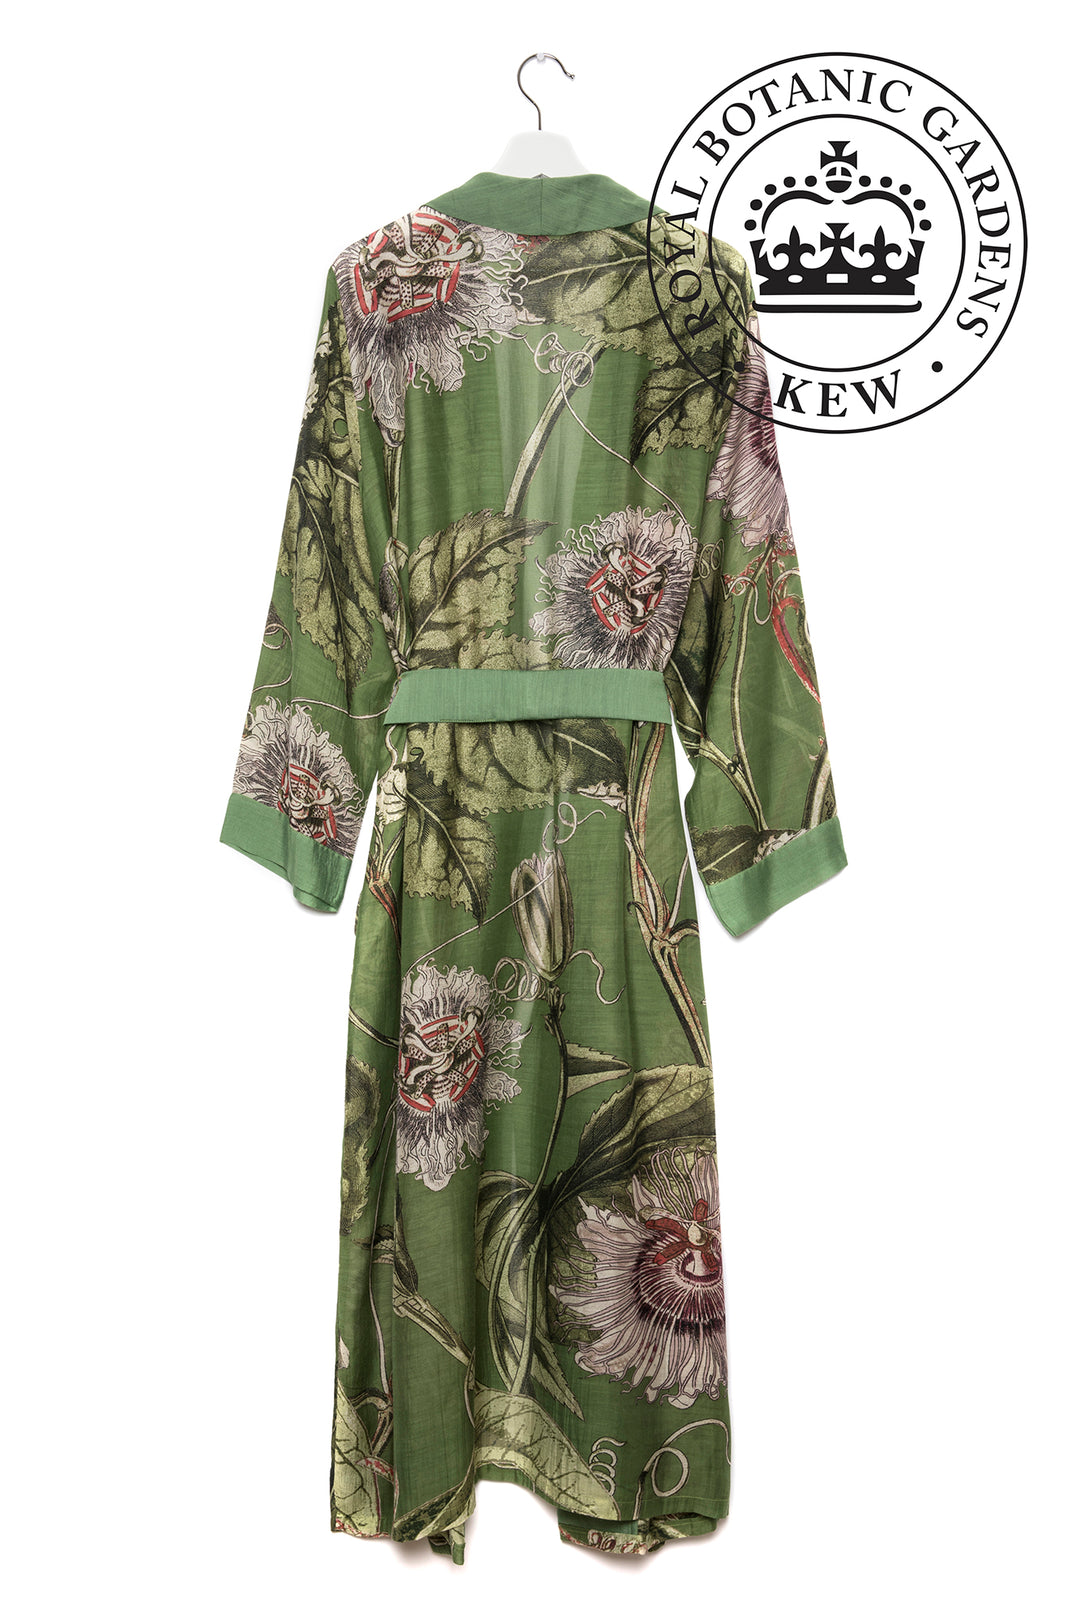 KEW Passion Flower Green Gown - One Hundred Stars